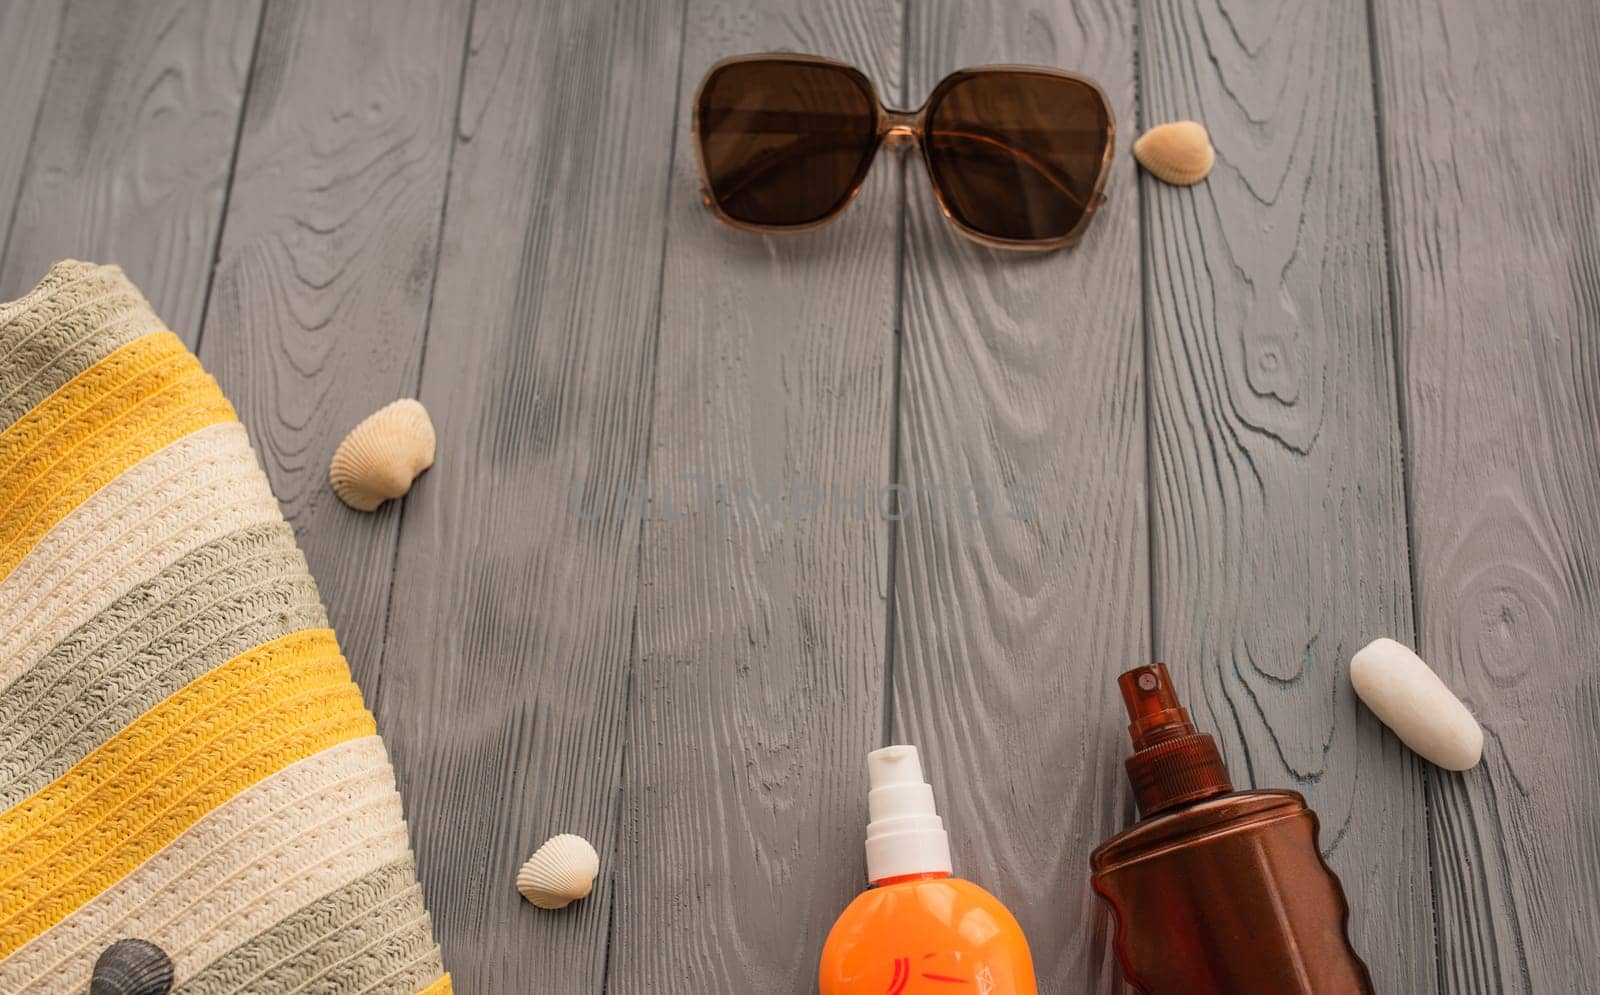 beachwear bag sun protection sunglasses sunscreen spray lotion cream care tan ultra-violet rays. Summer background template mockup free space pattern composition text. Top view above wooden background